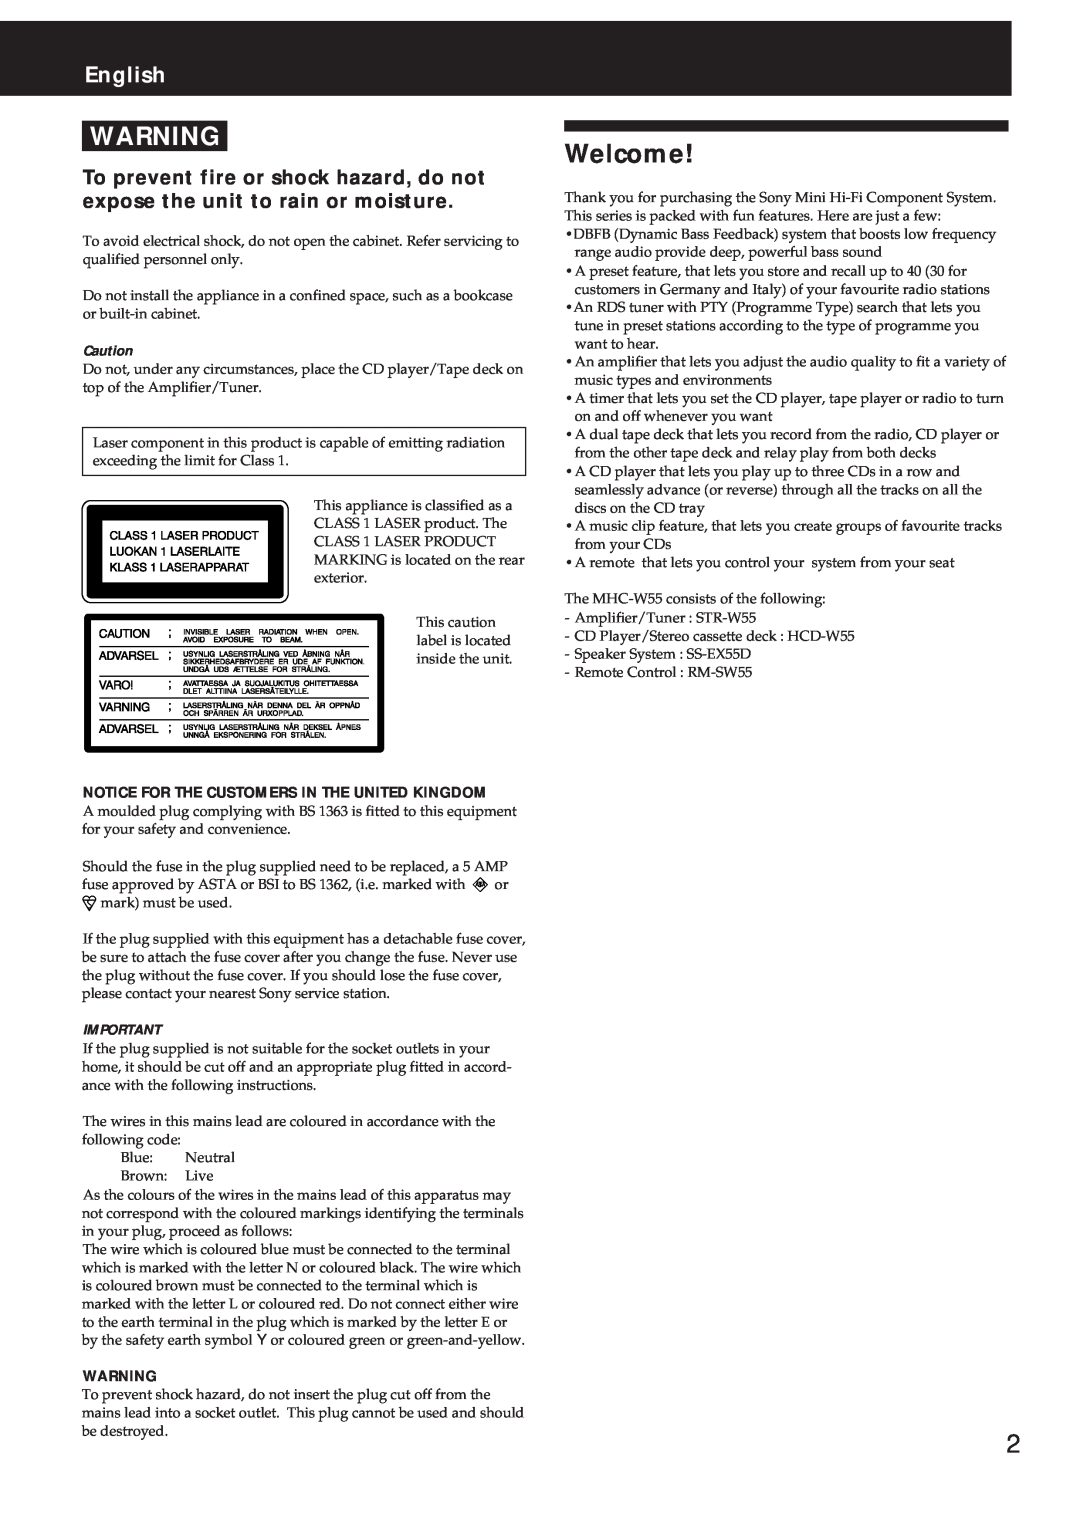 Sony MHC-W55 manual Welcome, English, Notice For The Customers In The United Kingdom 